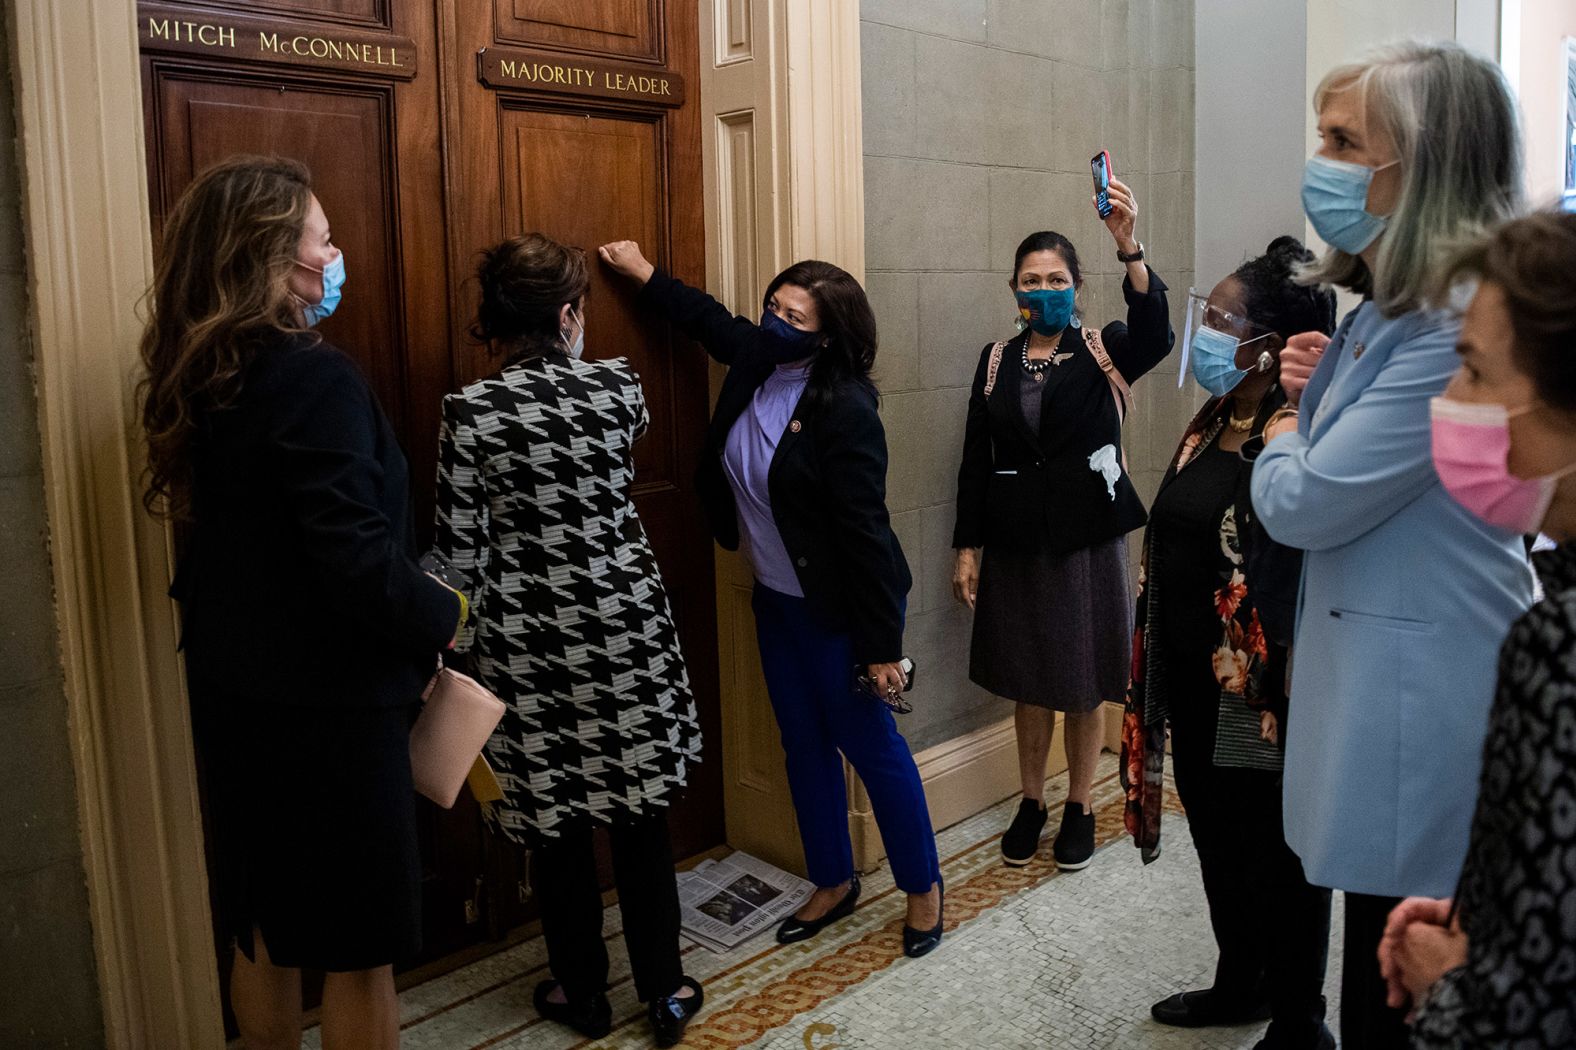 From left, US Reps. Veronica Escobar, Jackie Speier, Norma Torres, Deb Haaland, Sheila Jackson Lee, Katherine Clark and Jan Schakowsky, along with members of the Democratic Women's Caucus, deliver a letter to Senate Majority Leader Mitch McConnell's office on October 2. They were calling for the nomination process to be stopped until after the presidential inauguration.